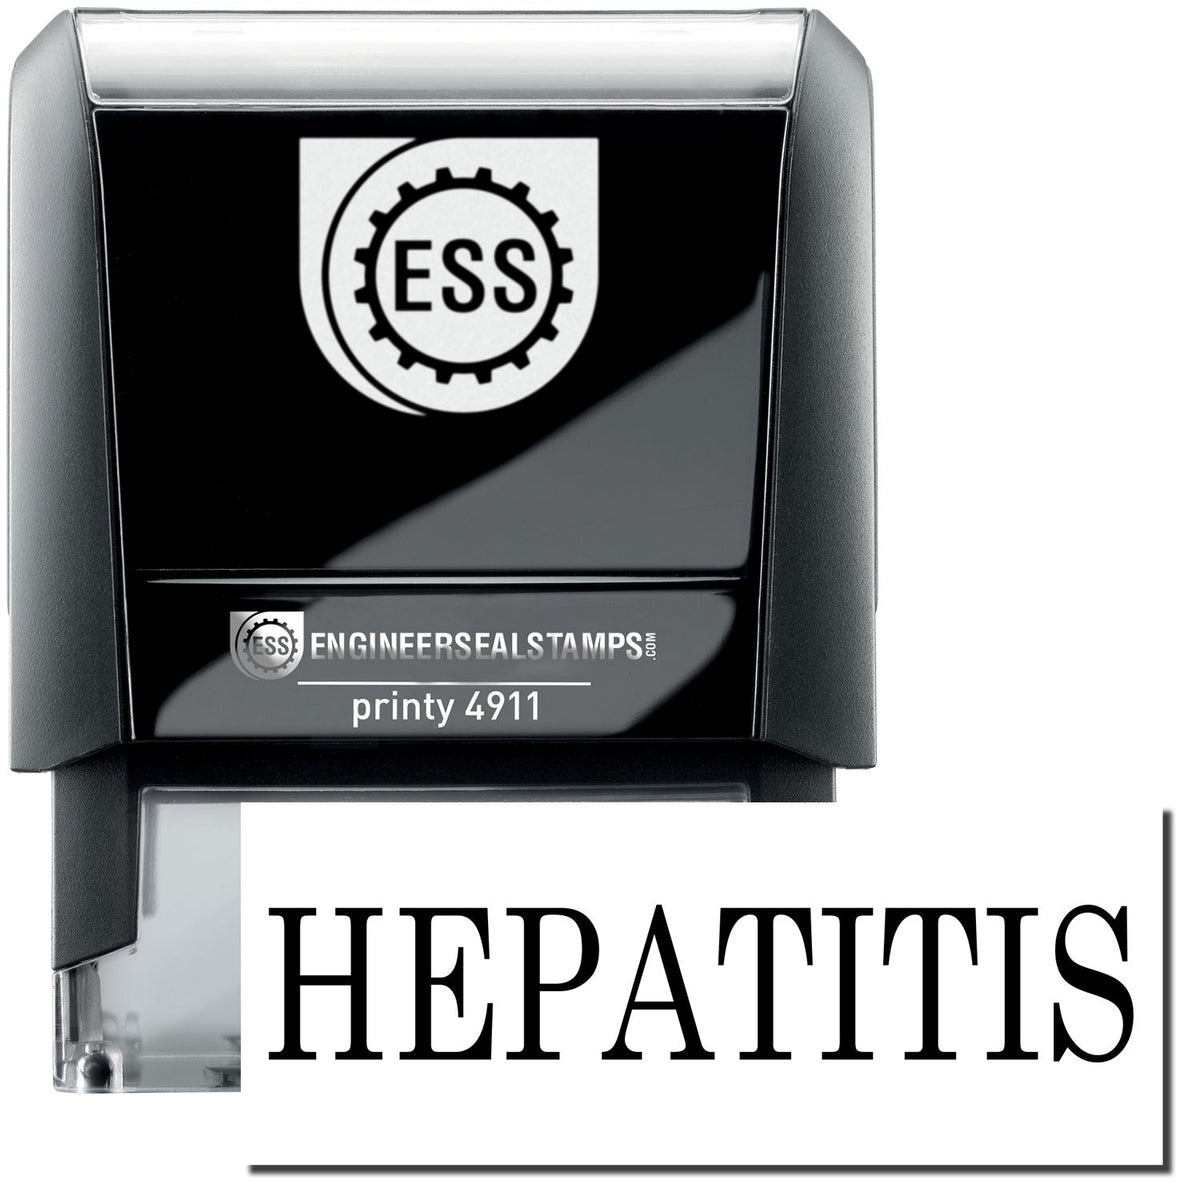 A self-inking stamp with a stamped image showing how the text &quot;HEPATITIS&quot; is displayed after stamping.